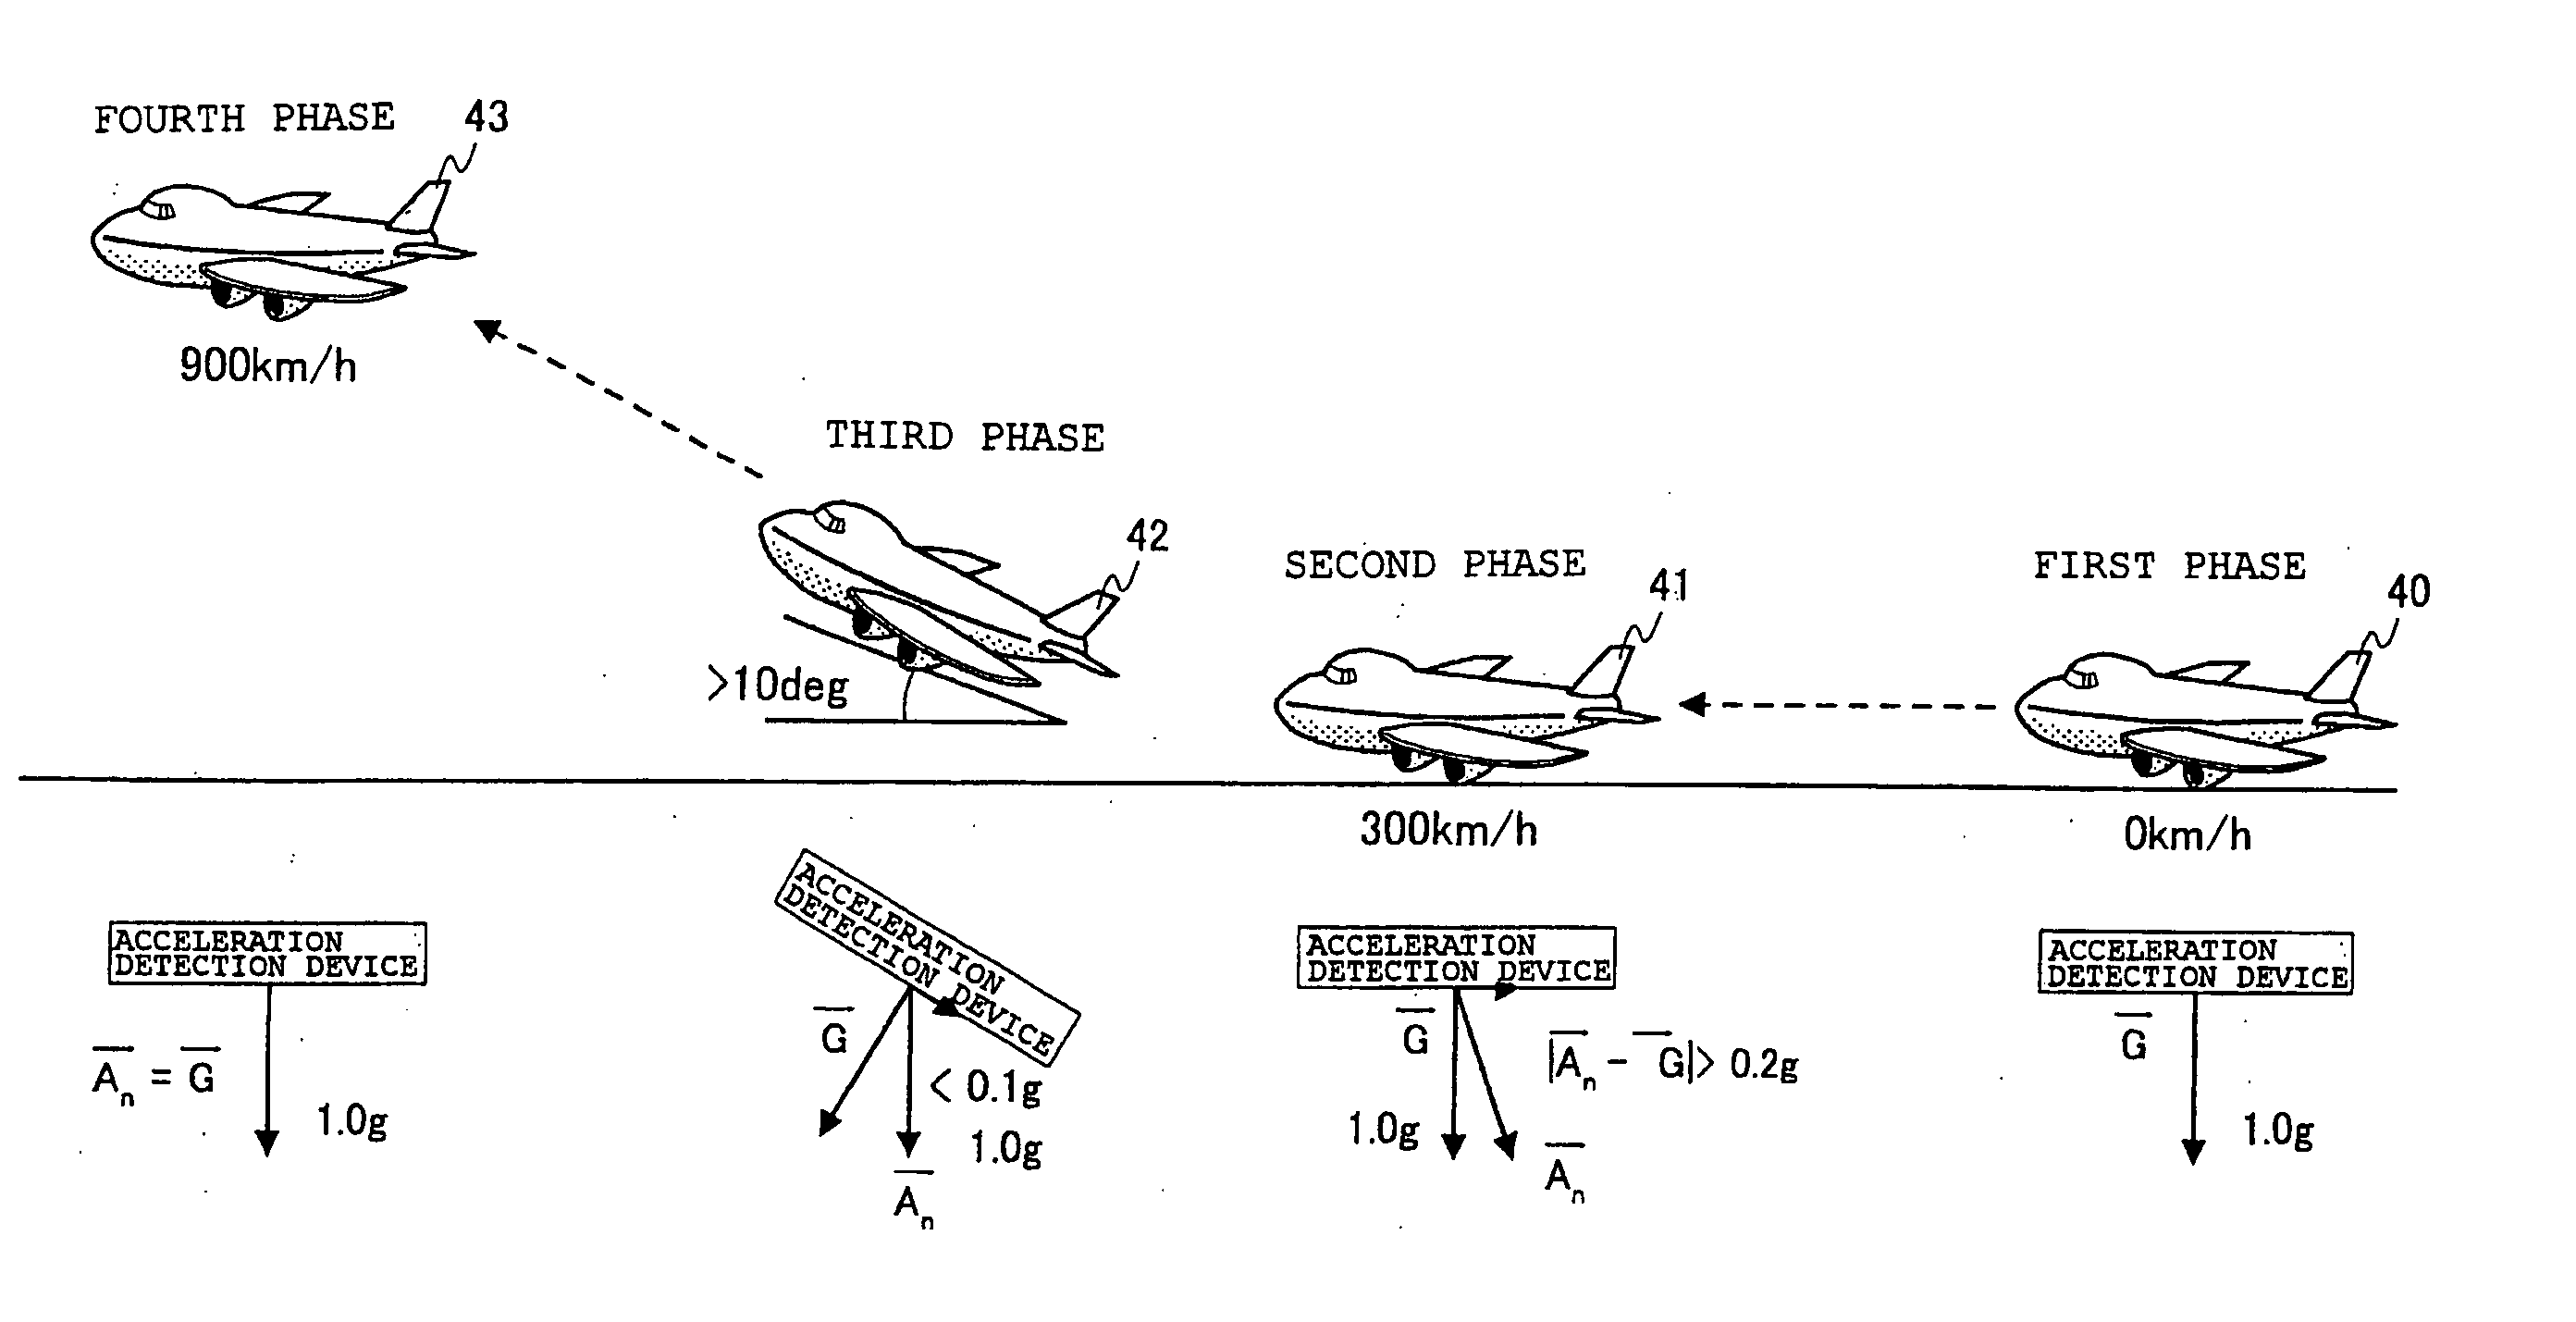 Method and apparatus for controlling radio wave transmission from a portable information processing device